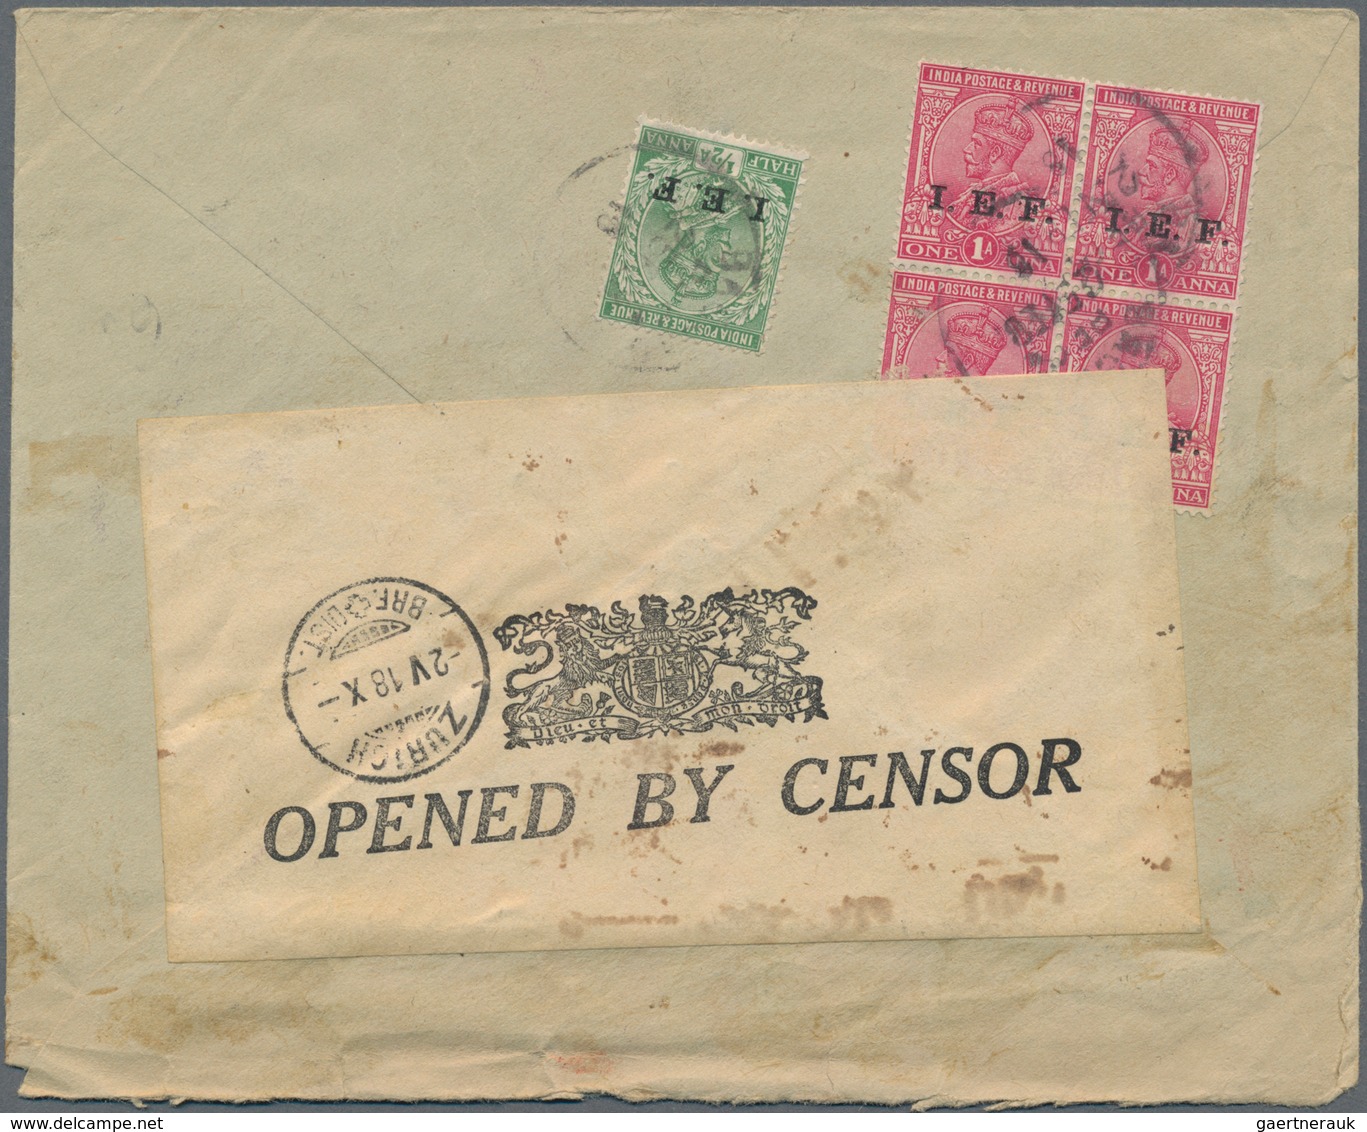 Indien - Feldpost: 1918 Registered And Censored Cover From Baghdad To Zurich, Switzerland Franked On - Military Service Stamp